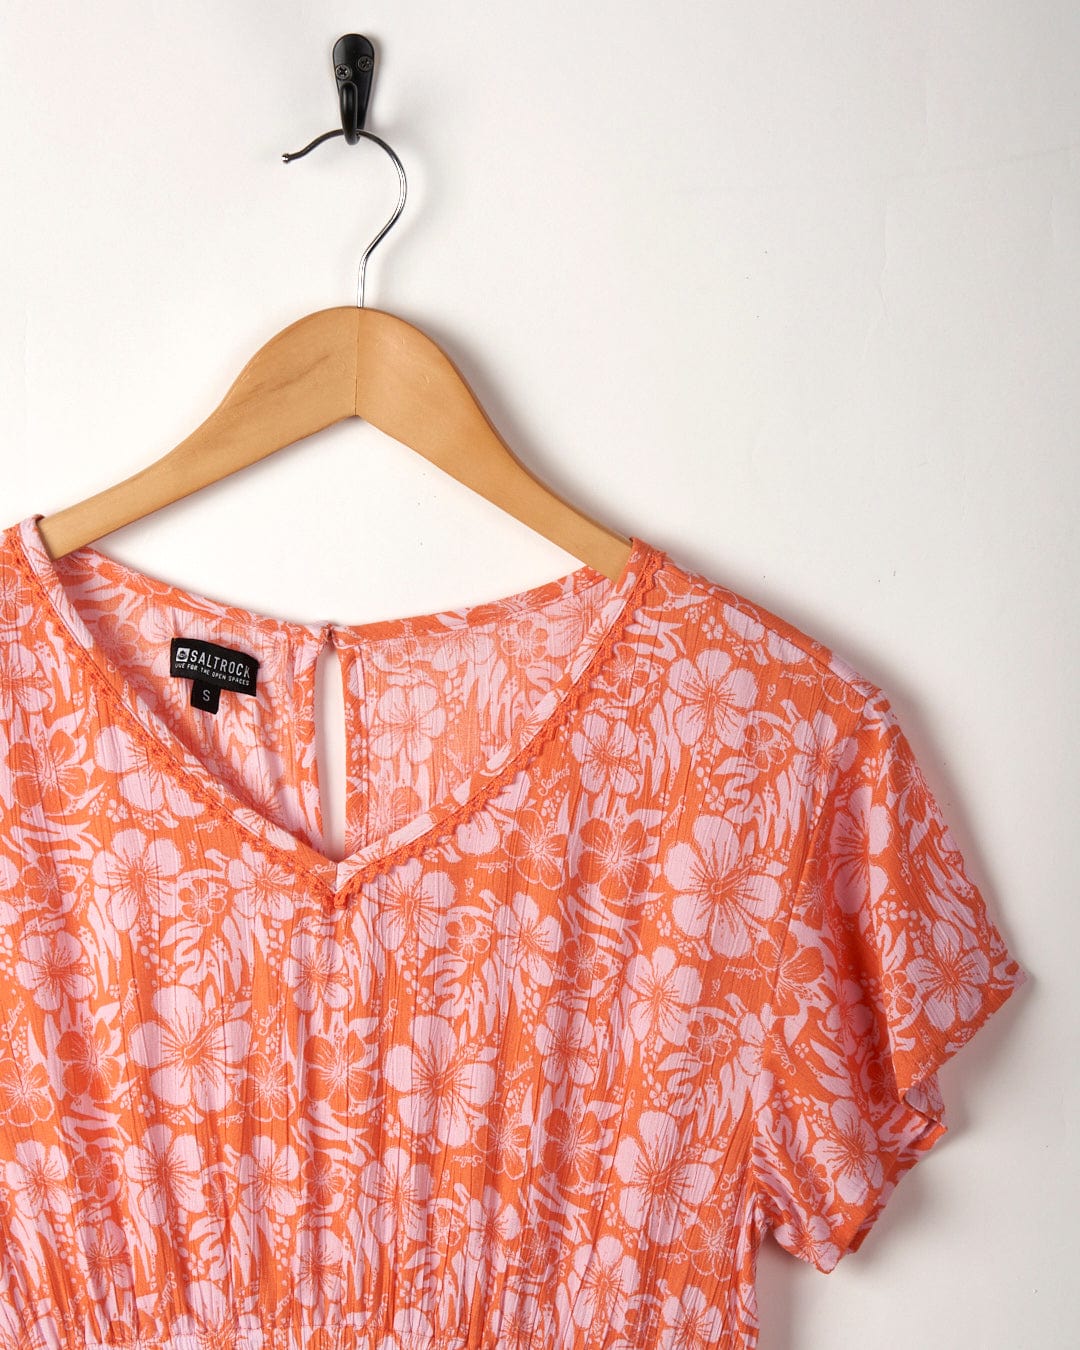 Marla Hibiscus womens dress in pink/orange hanging on a wooden hanger against a white wall.